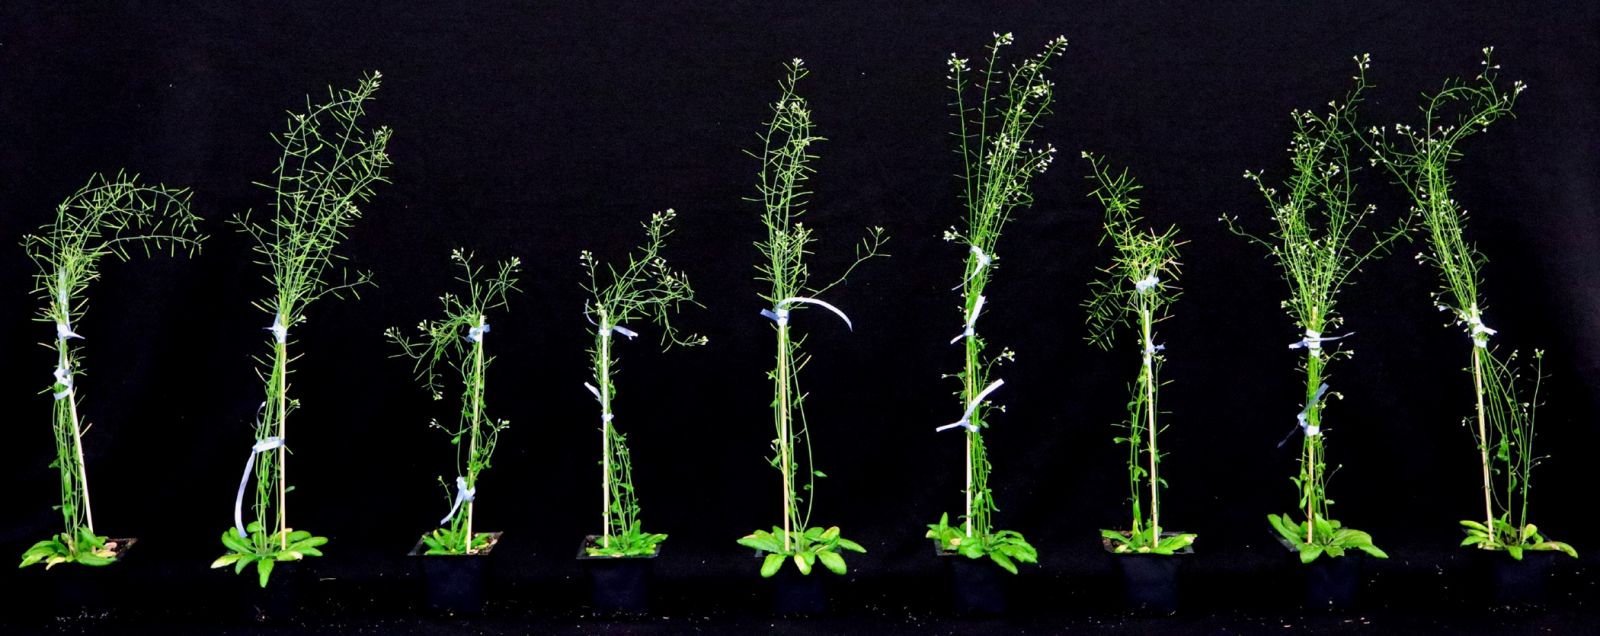 The team studied a variety of Arabidopsis phenotypes during the project.